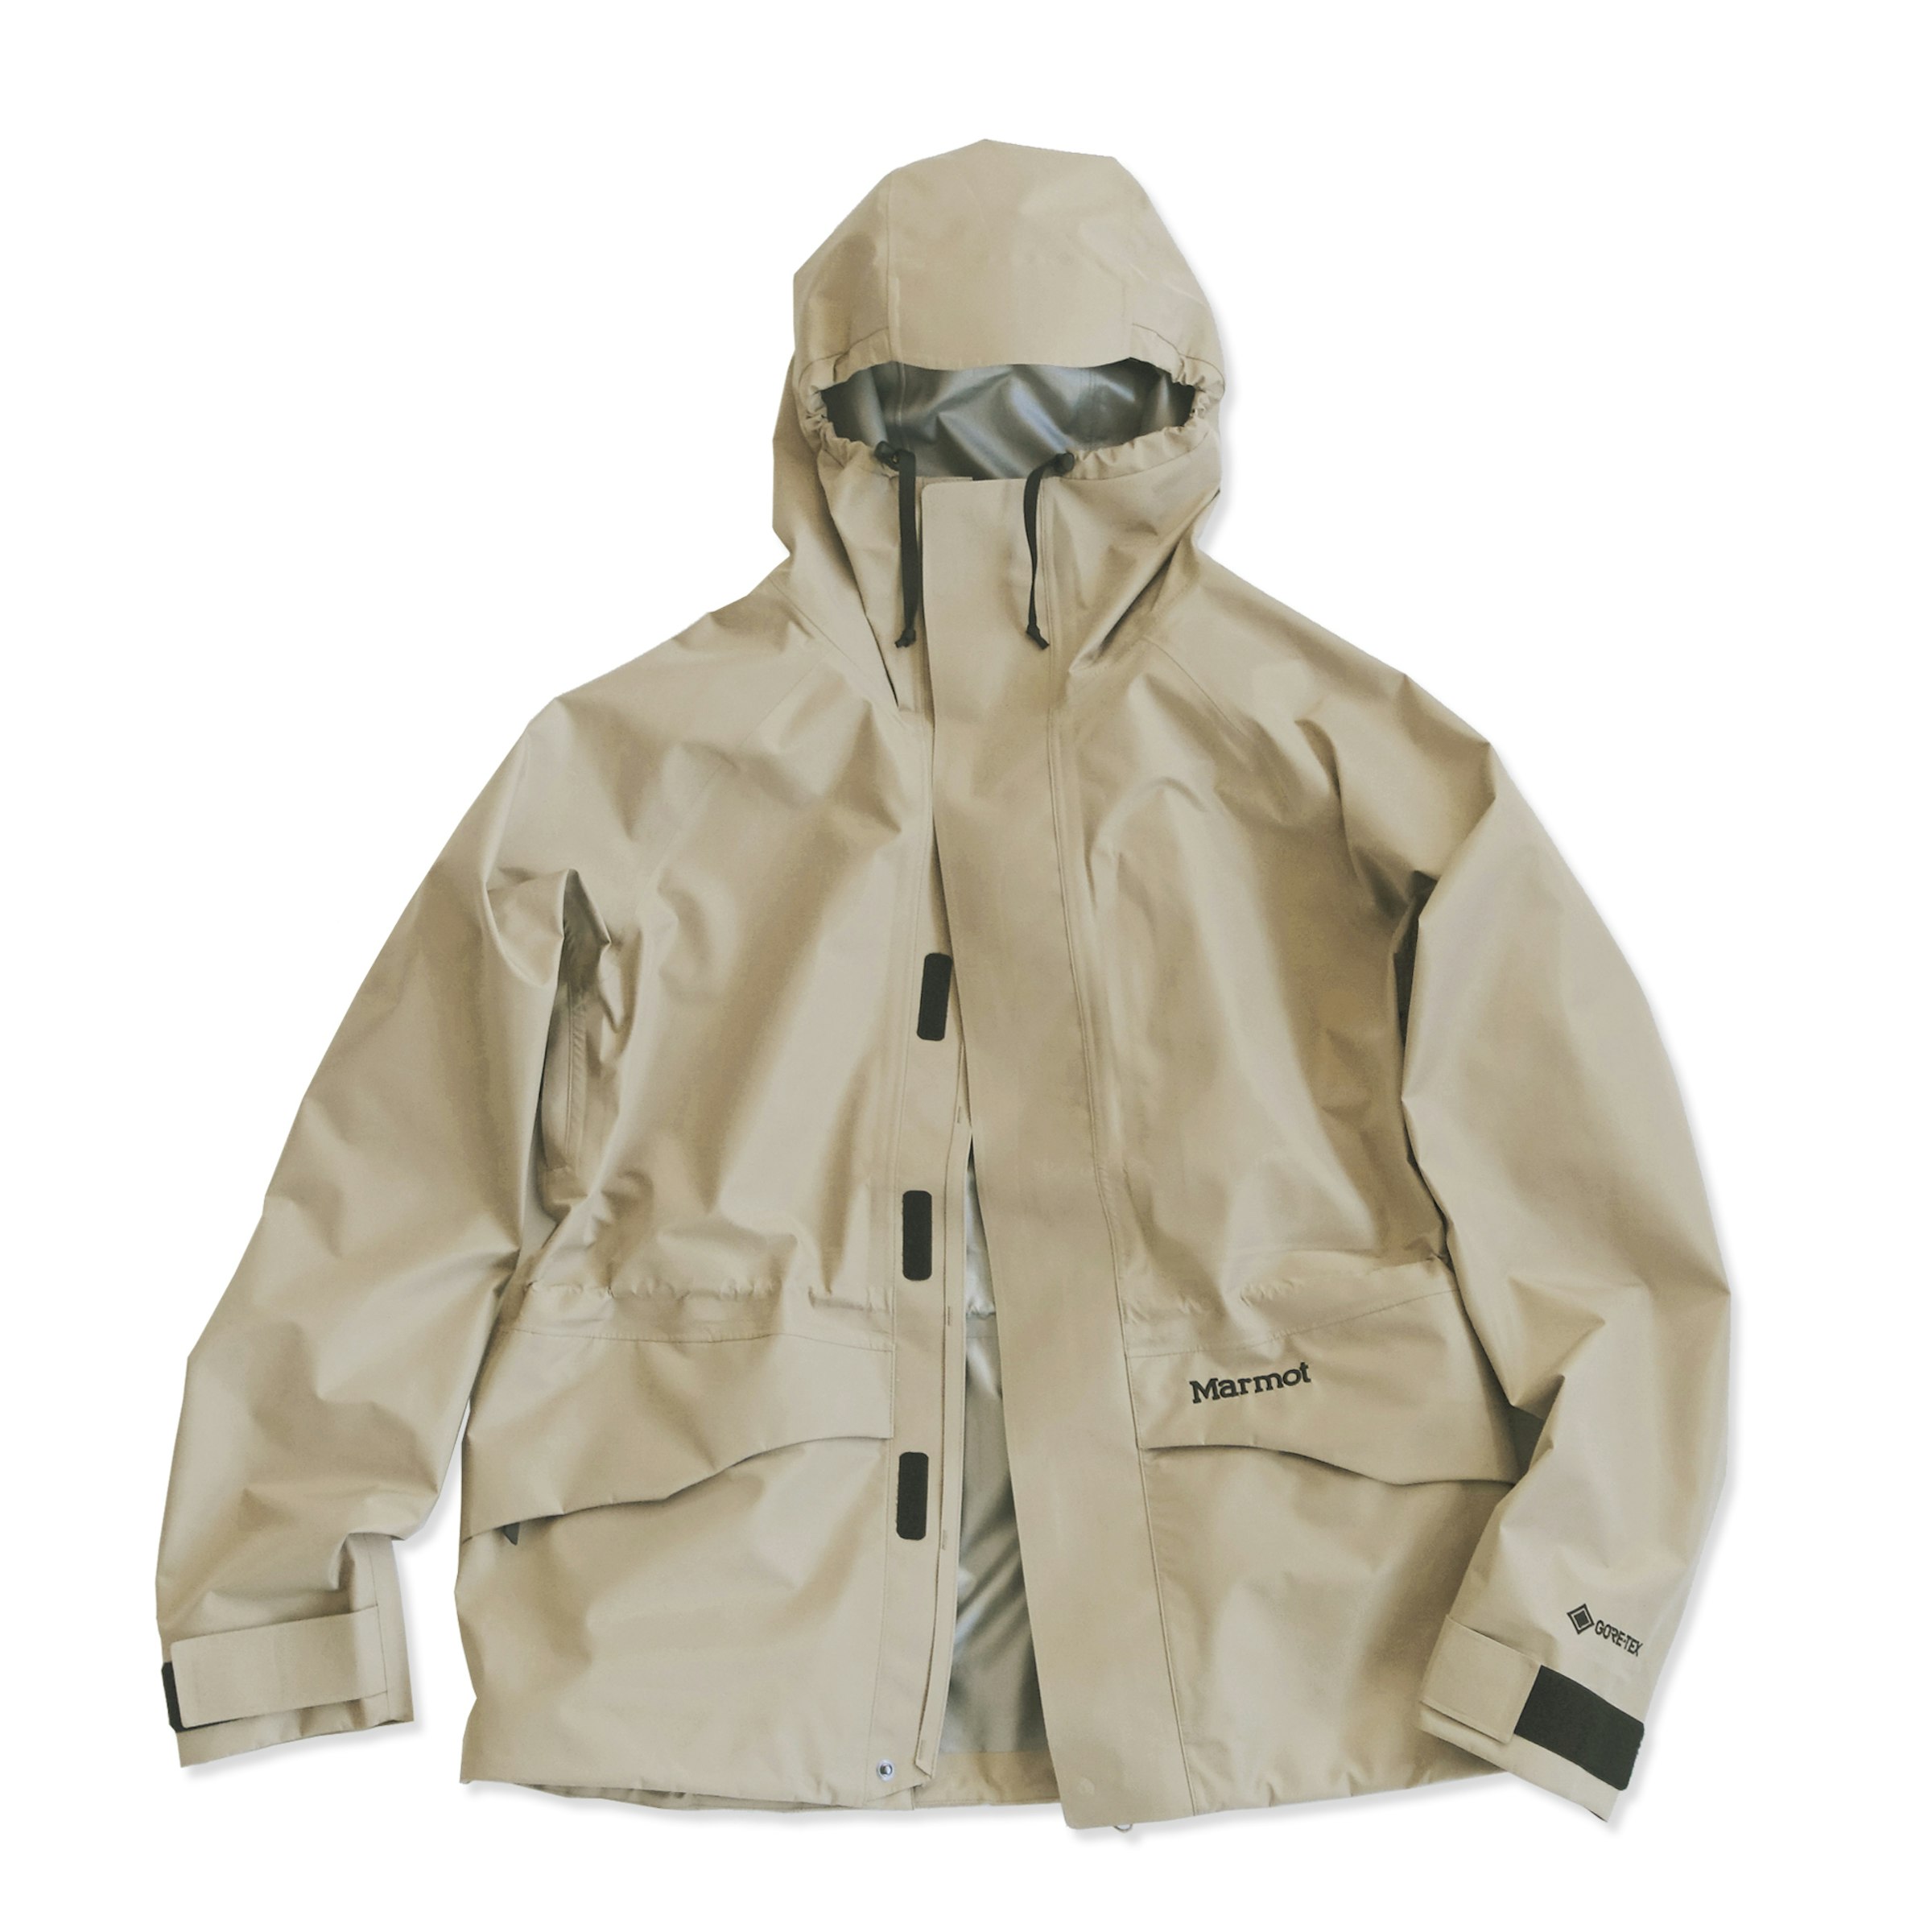 'All-Weather Parka,' the current model. While faithfully reproducing the details from its debut, the silhouette has been updated to a contemporary style. Available in three colors. Priced at 35,200 yen (tax included)